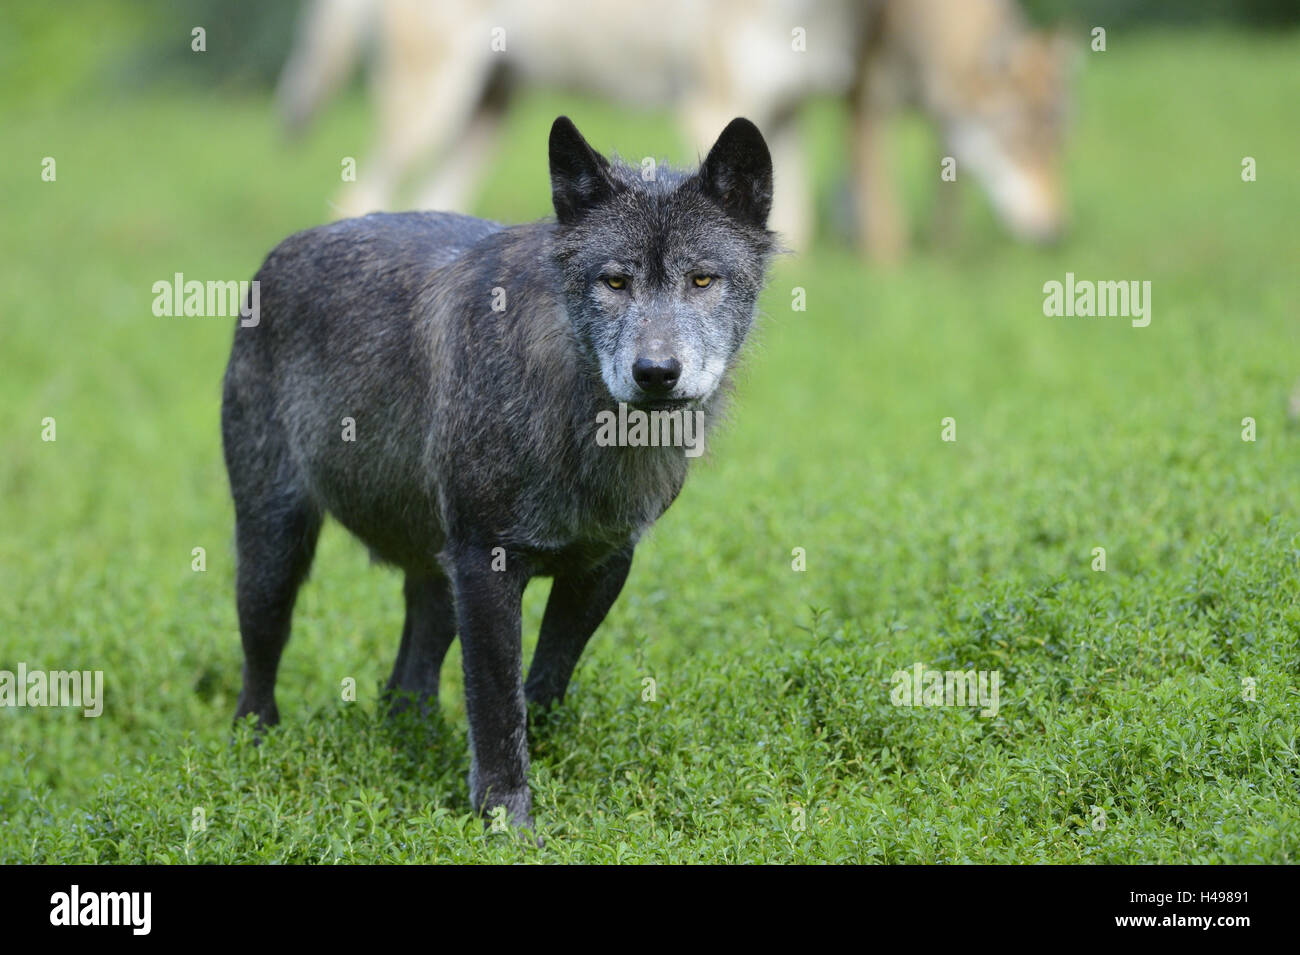 Loup, Canis lupus lycaon, meadow, debout, looking at camera, Banque D'Images